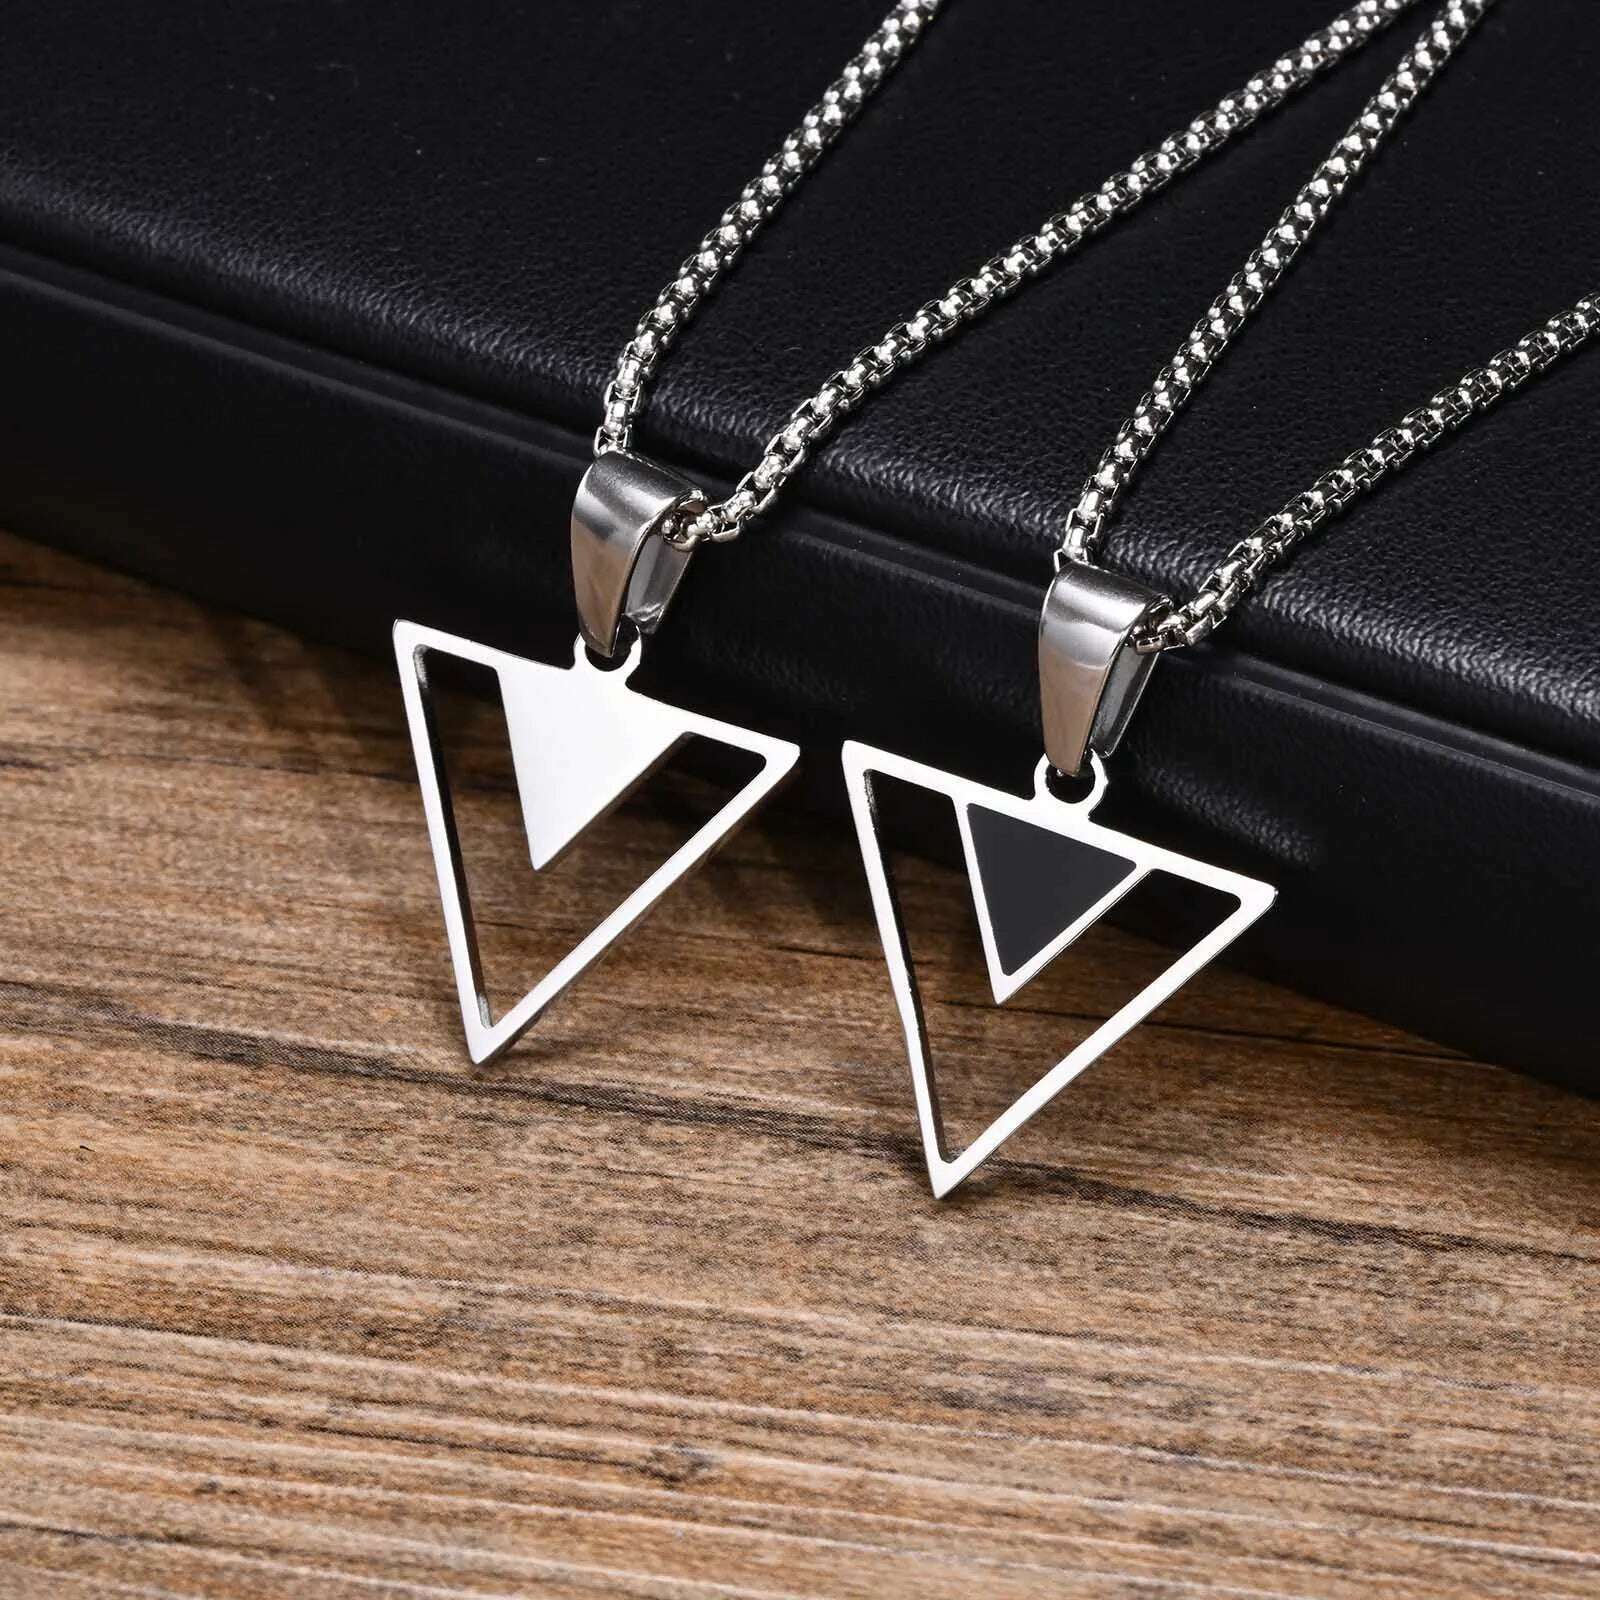 KIMLUD, Vnox New Fashion Triangle Pendant Necklace for Men Boys, Minimalist Stainless Steel Hollow Geometric Collar Male Jewelry Gift, PN-1835S / 70cm, KIMLUD Womens Clothes